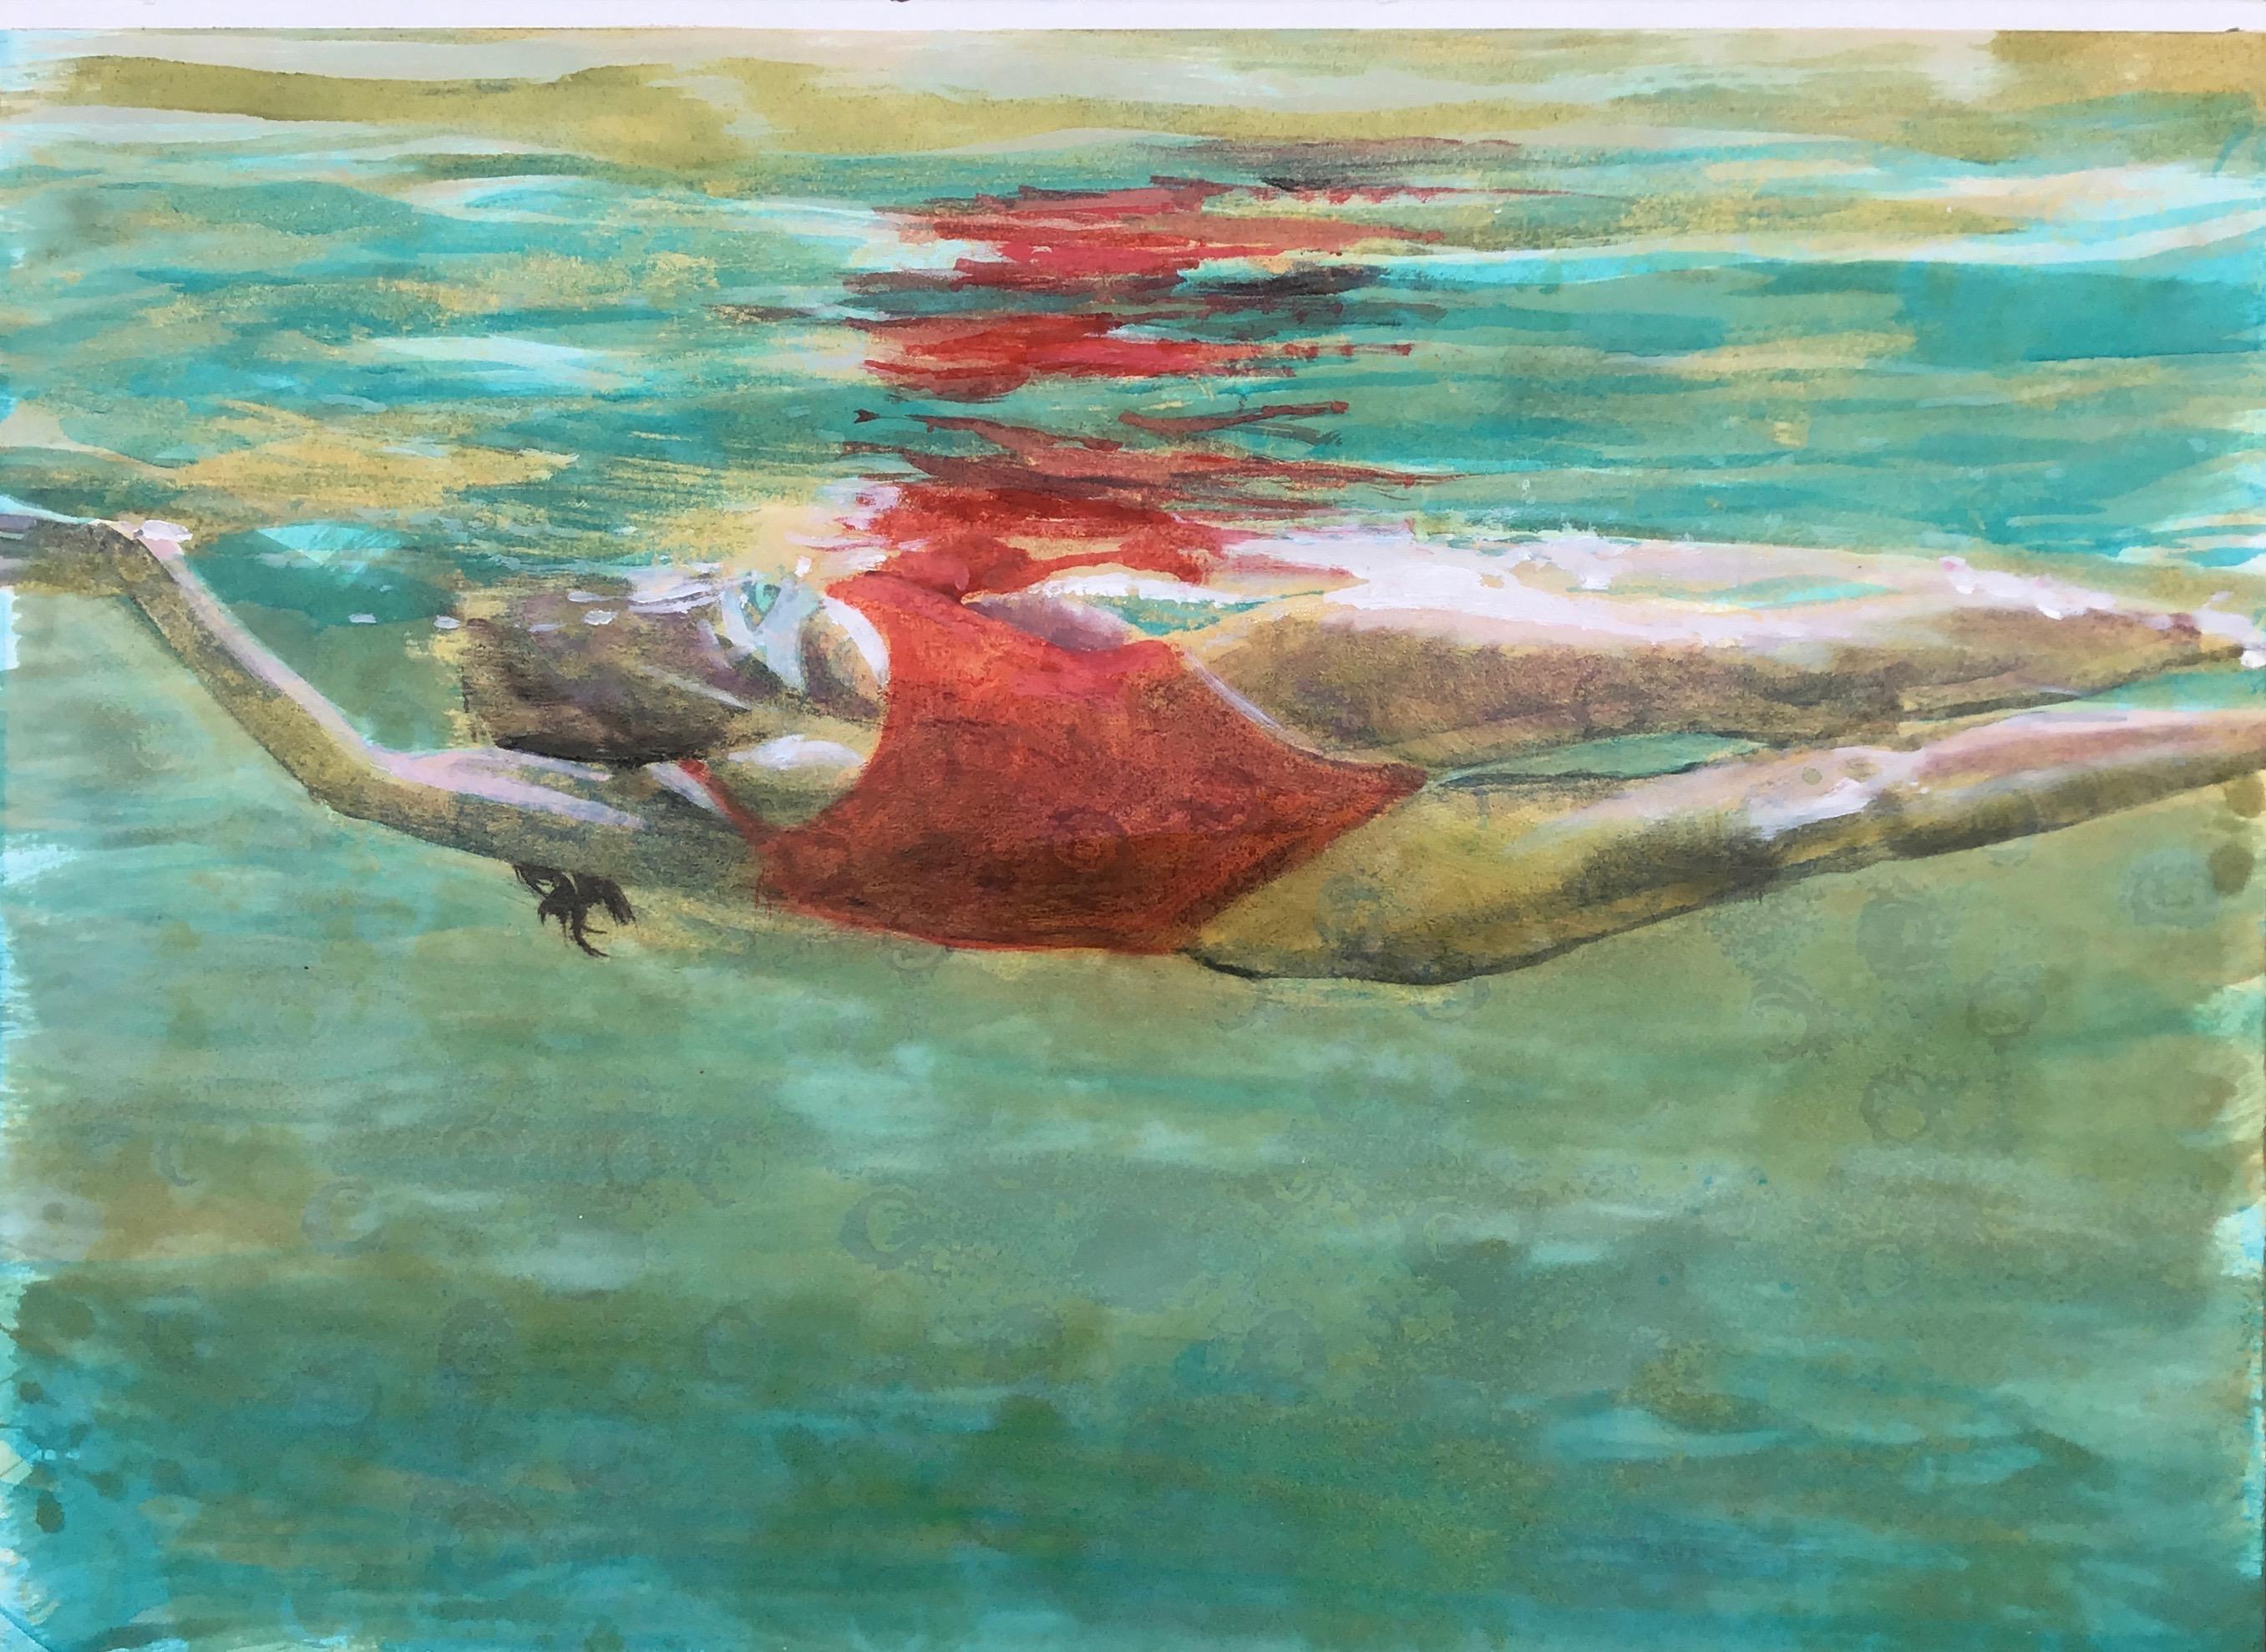 Carol Bennett Figurative Painting - "Effervescence" oil painting of a woman in a red suit in turquoise water